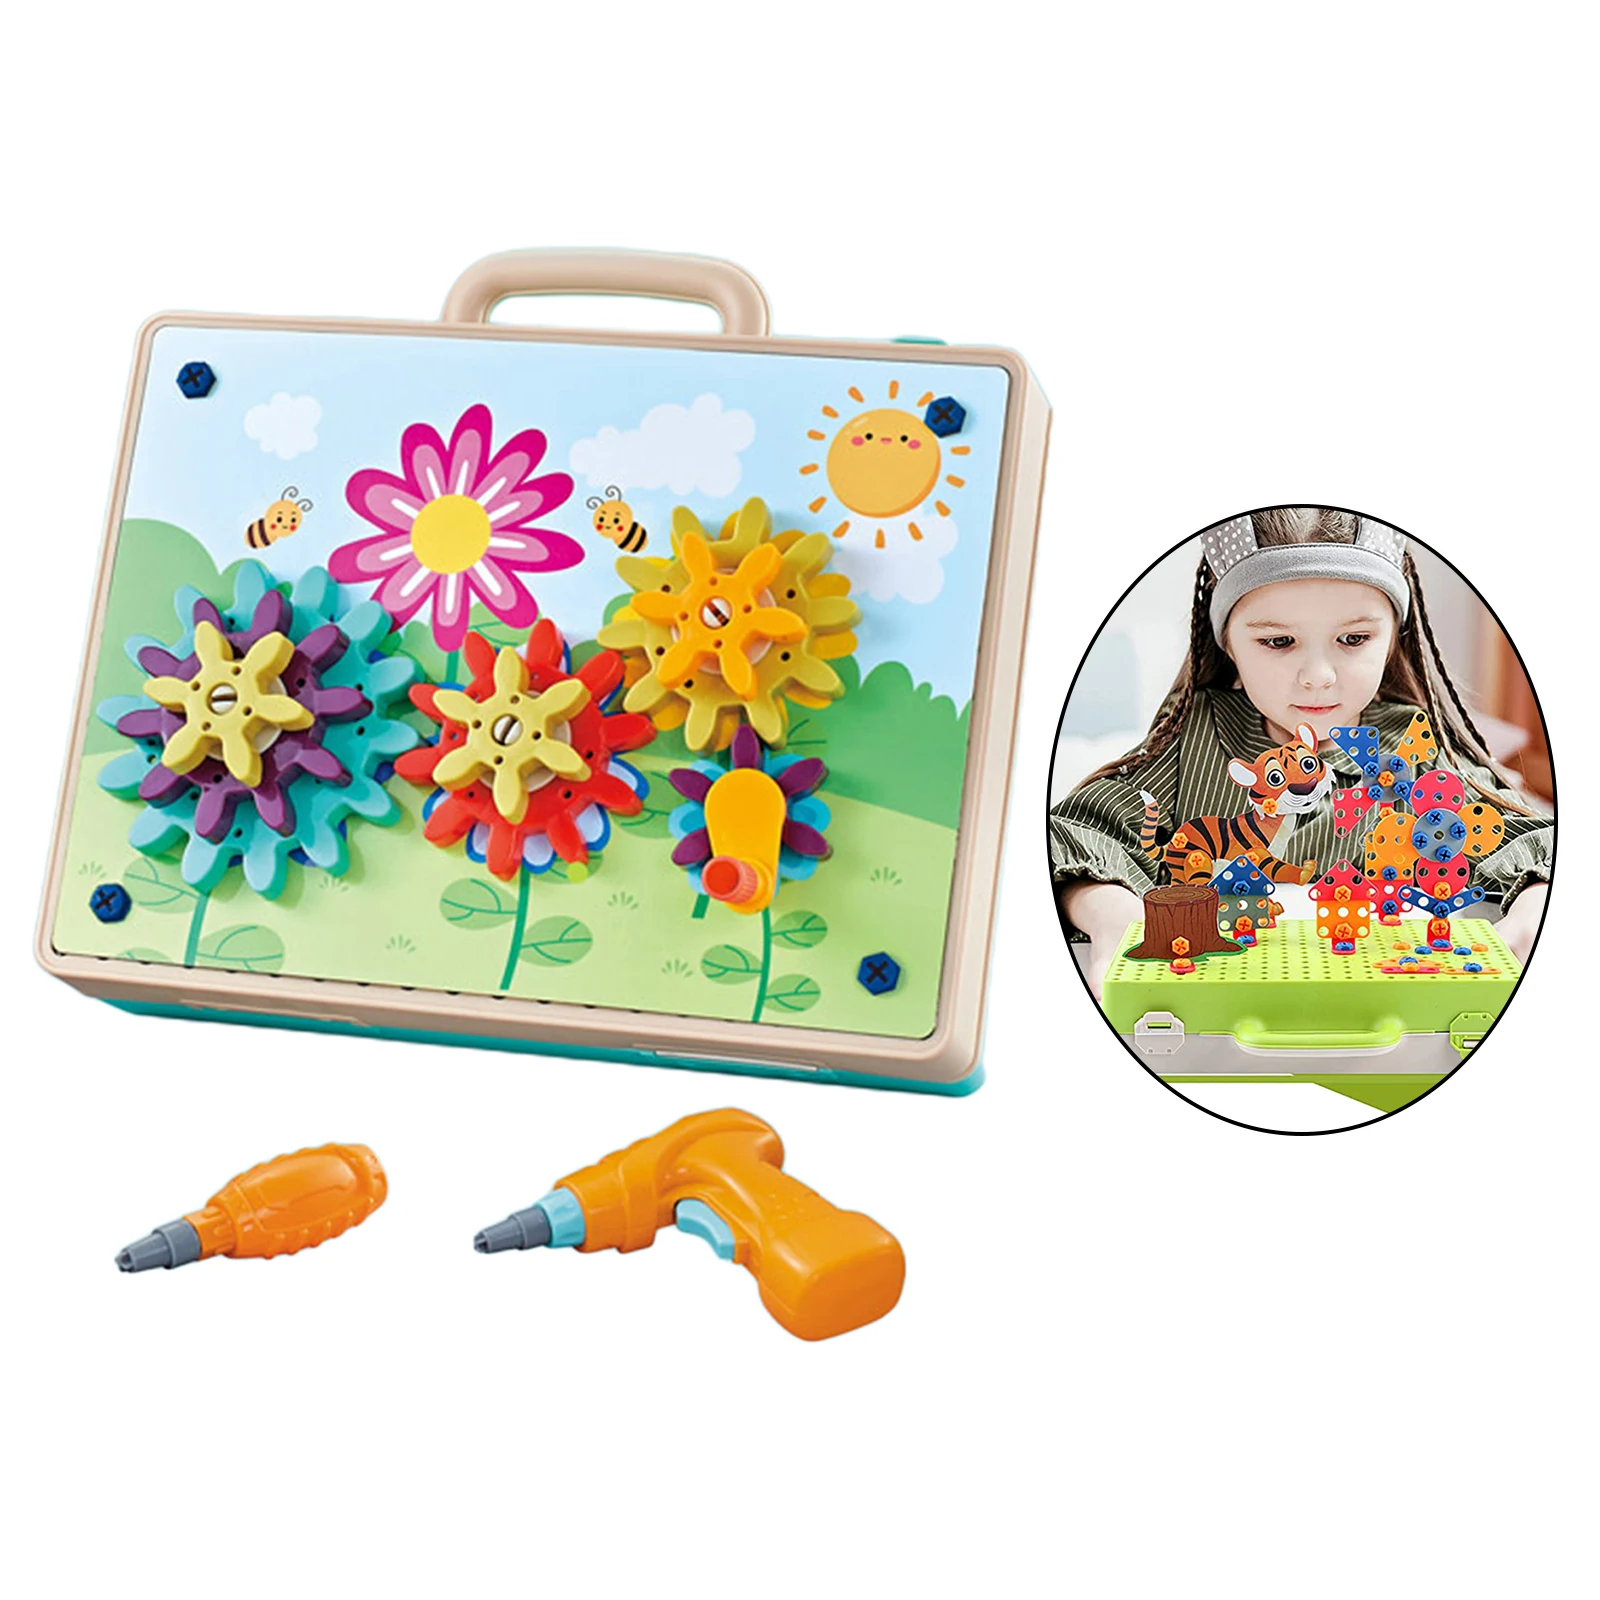 Kids Creative Children 3D Puzzle Screw Pegs Educational Toys DIY Box Gift